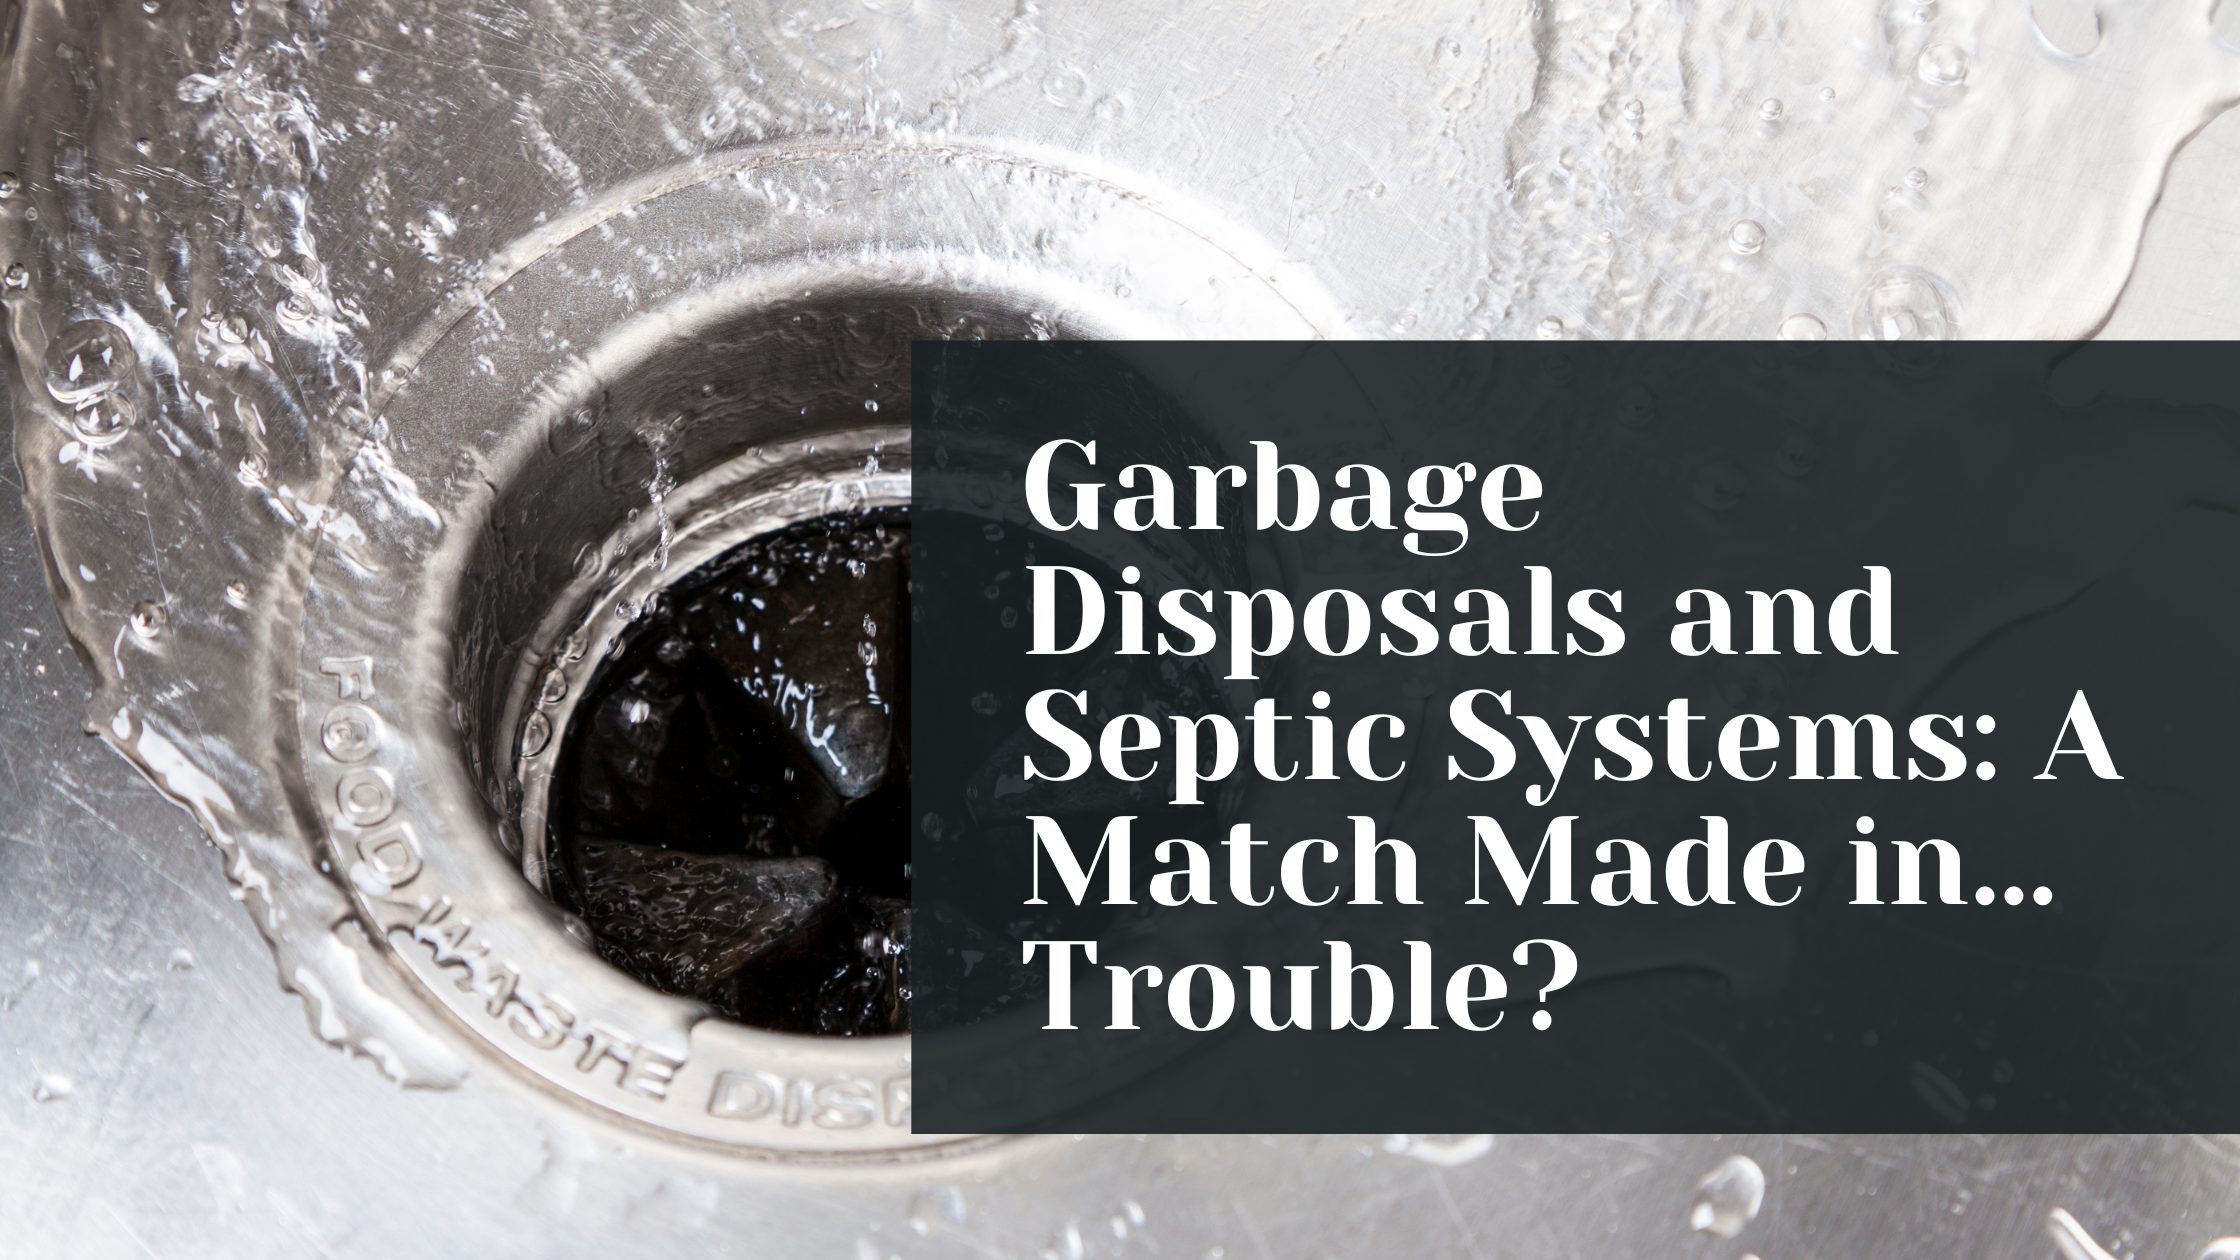 kitchen sink drain with garbage disposal, title of blog hovering above the image